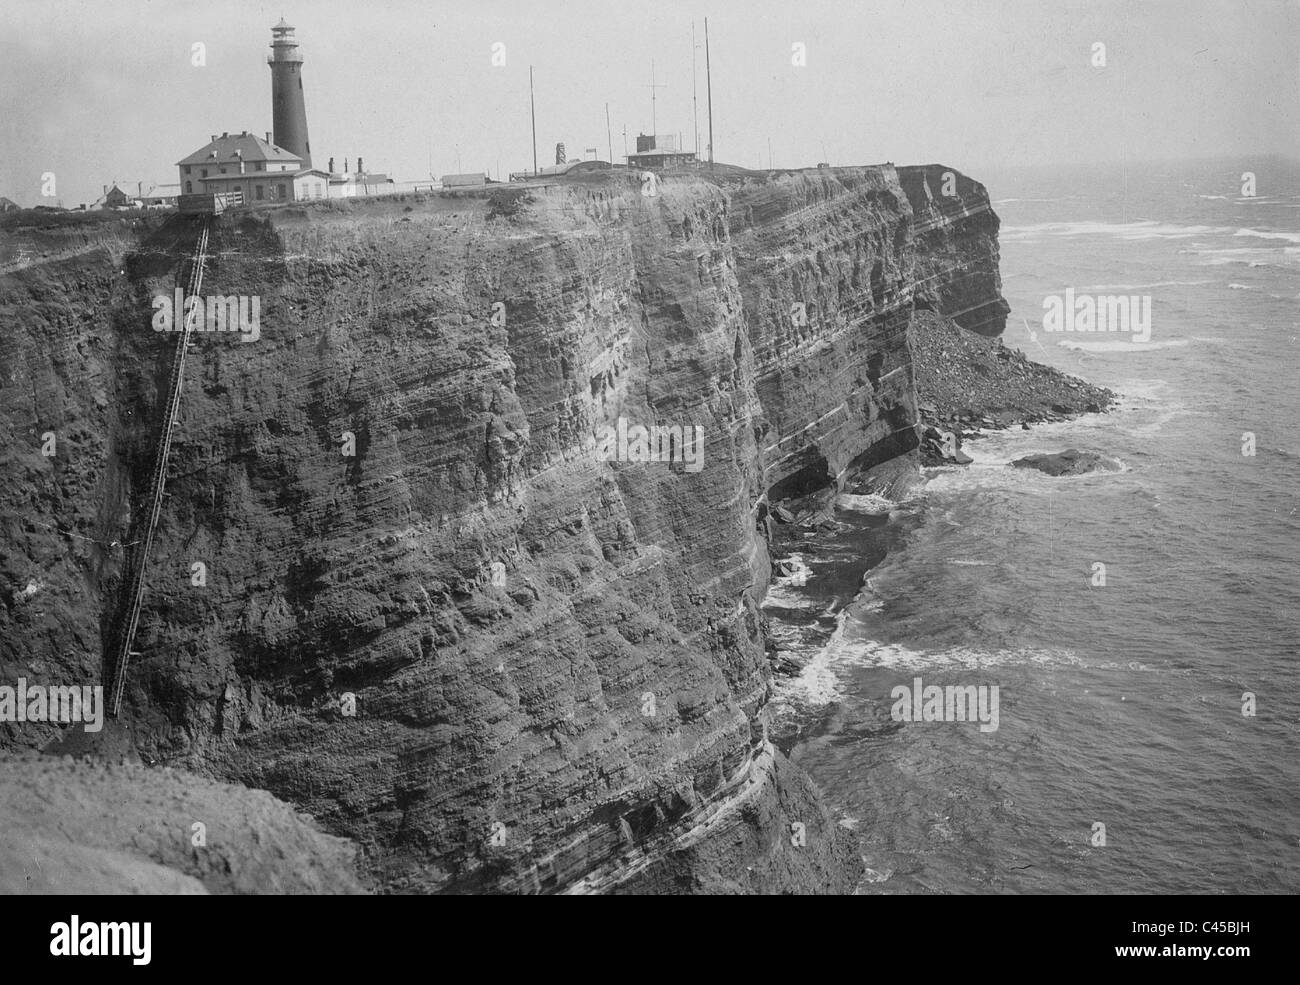 The 'helgoland' Black and White Stock Photos & Images - Alamy